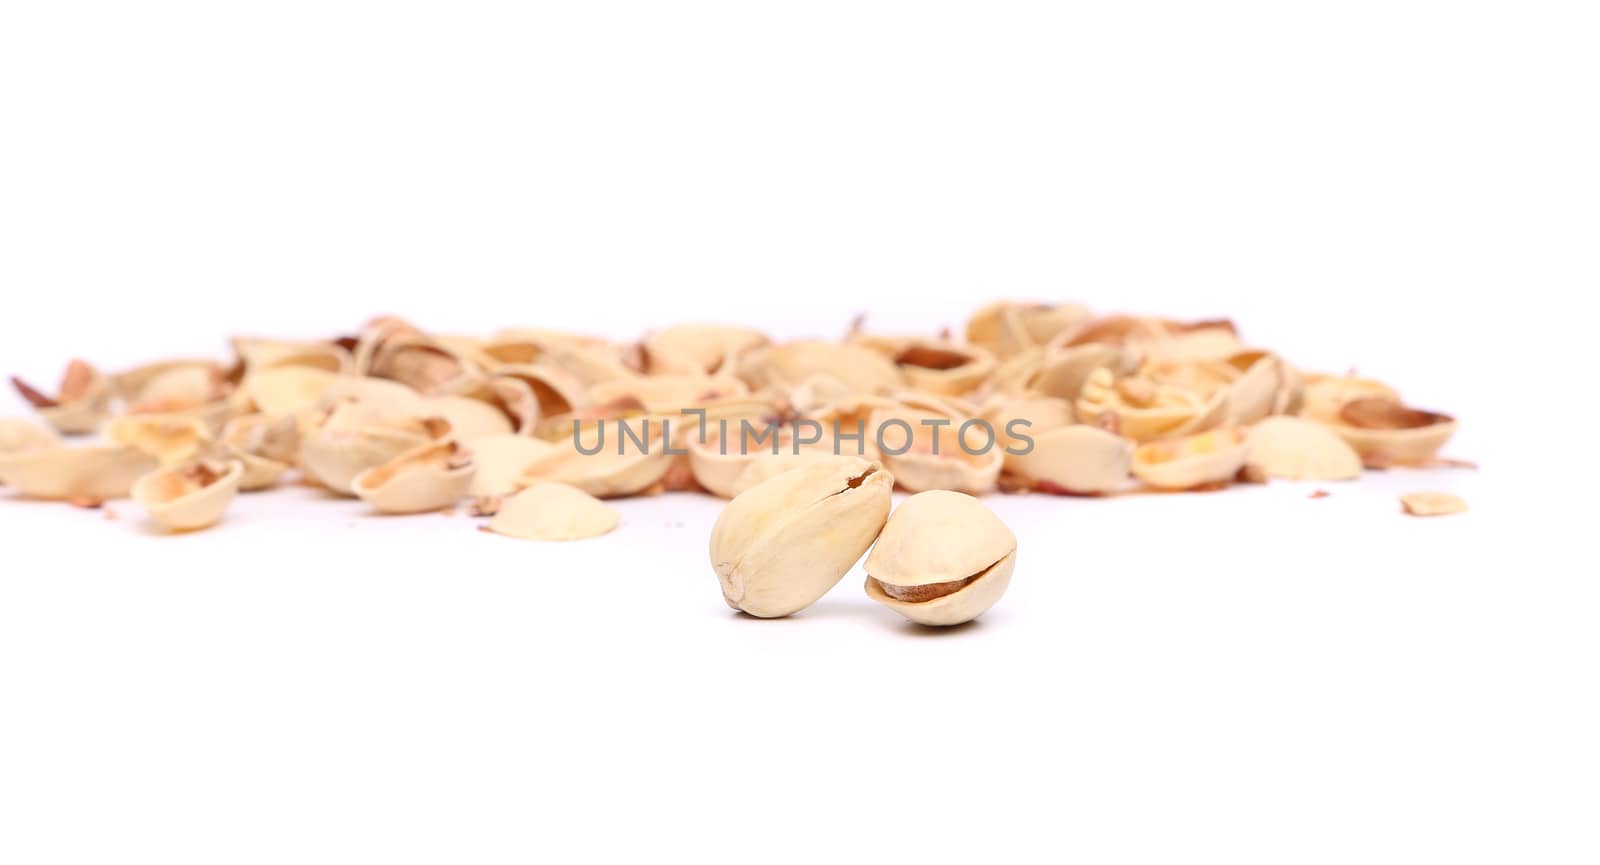 Two pistachios and peel on the white background.